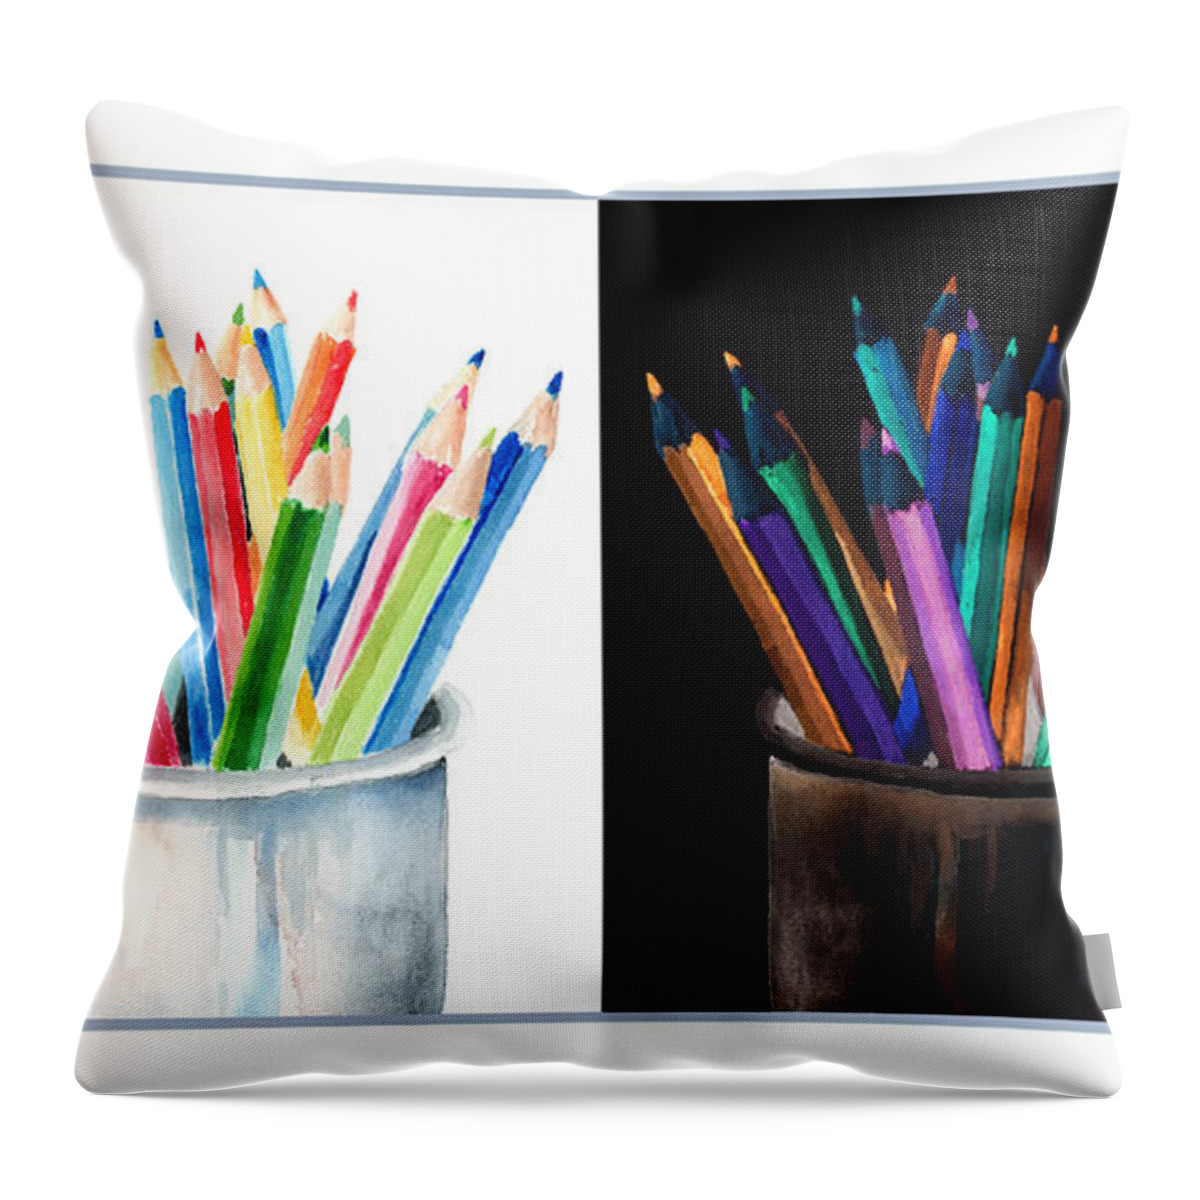 Colored Pencils Throw Pillow featuring the painting Colored Pencils - The Positive And The Negative by Arline Wagner